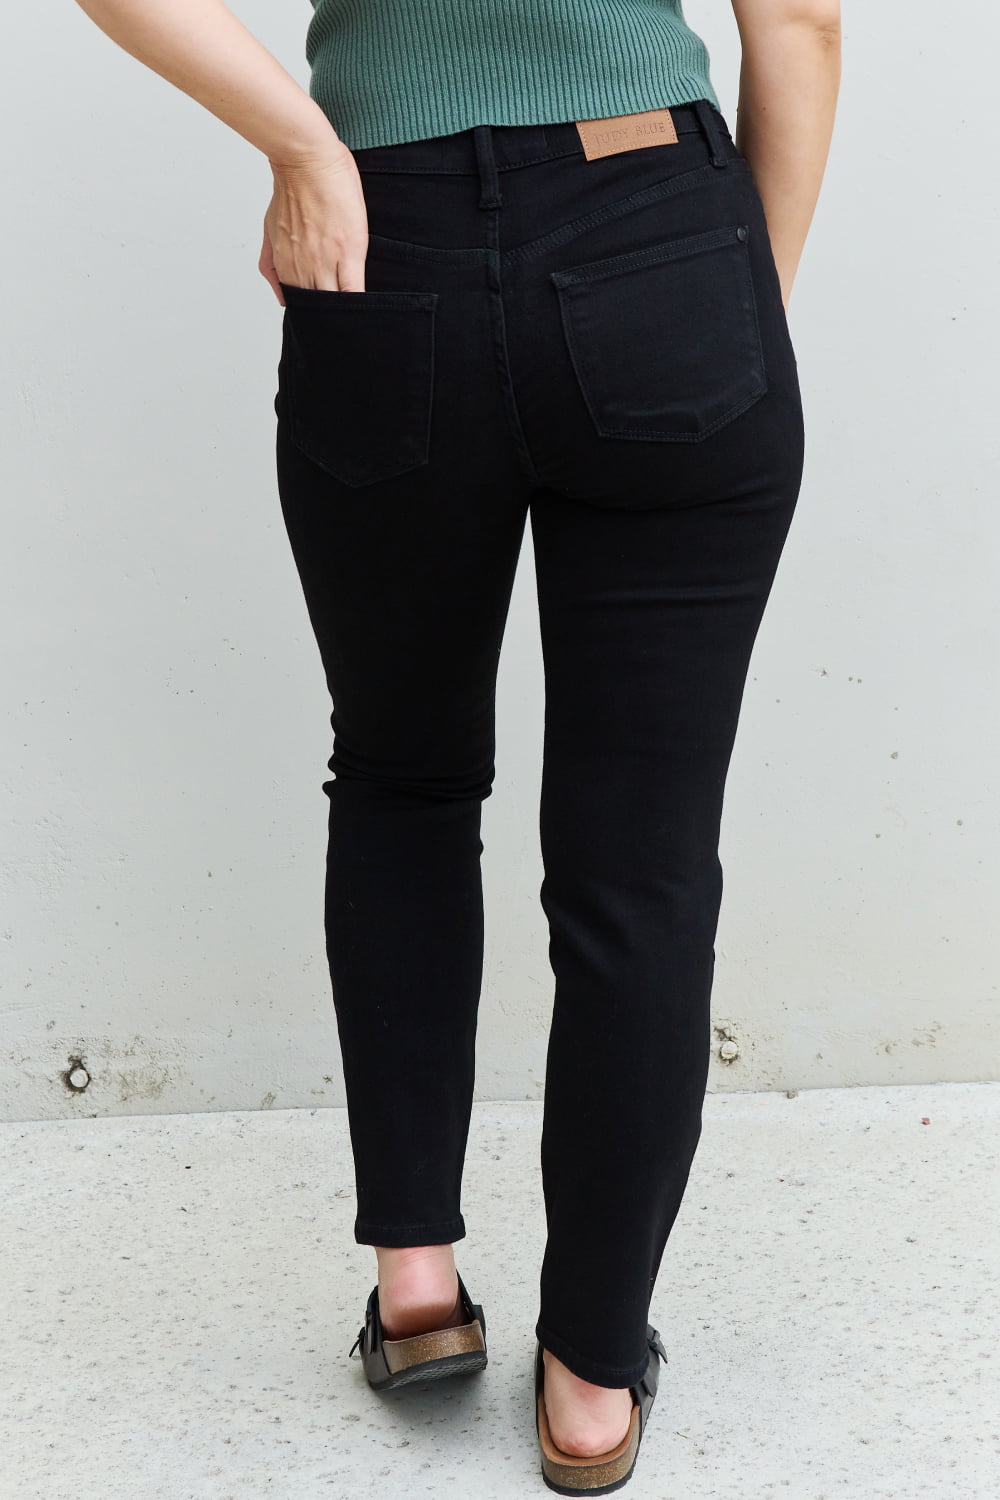 Judy Blue Kenya Mid Rise Slim Jeans - Cheeky Chic Boutique